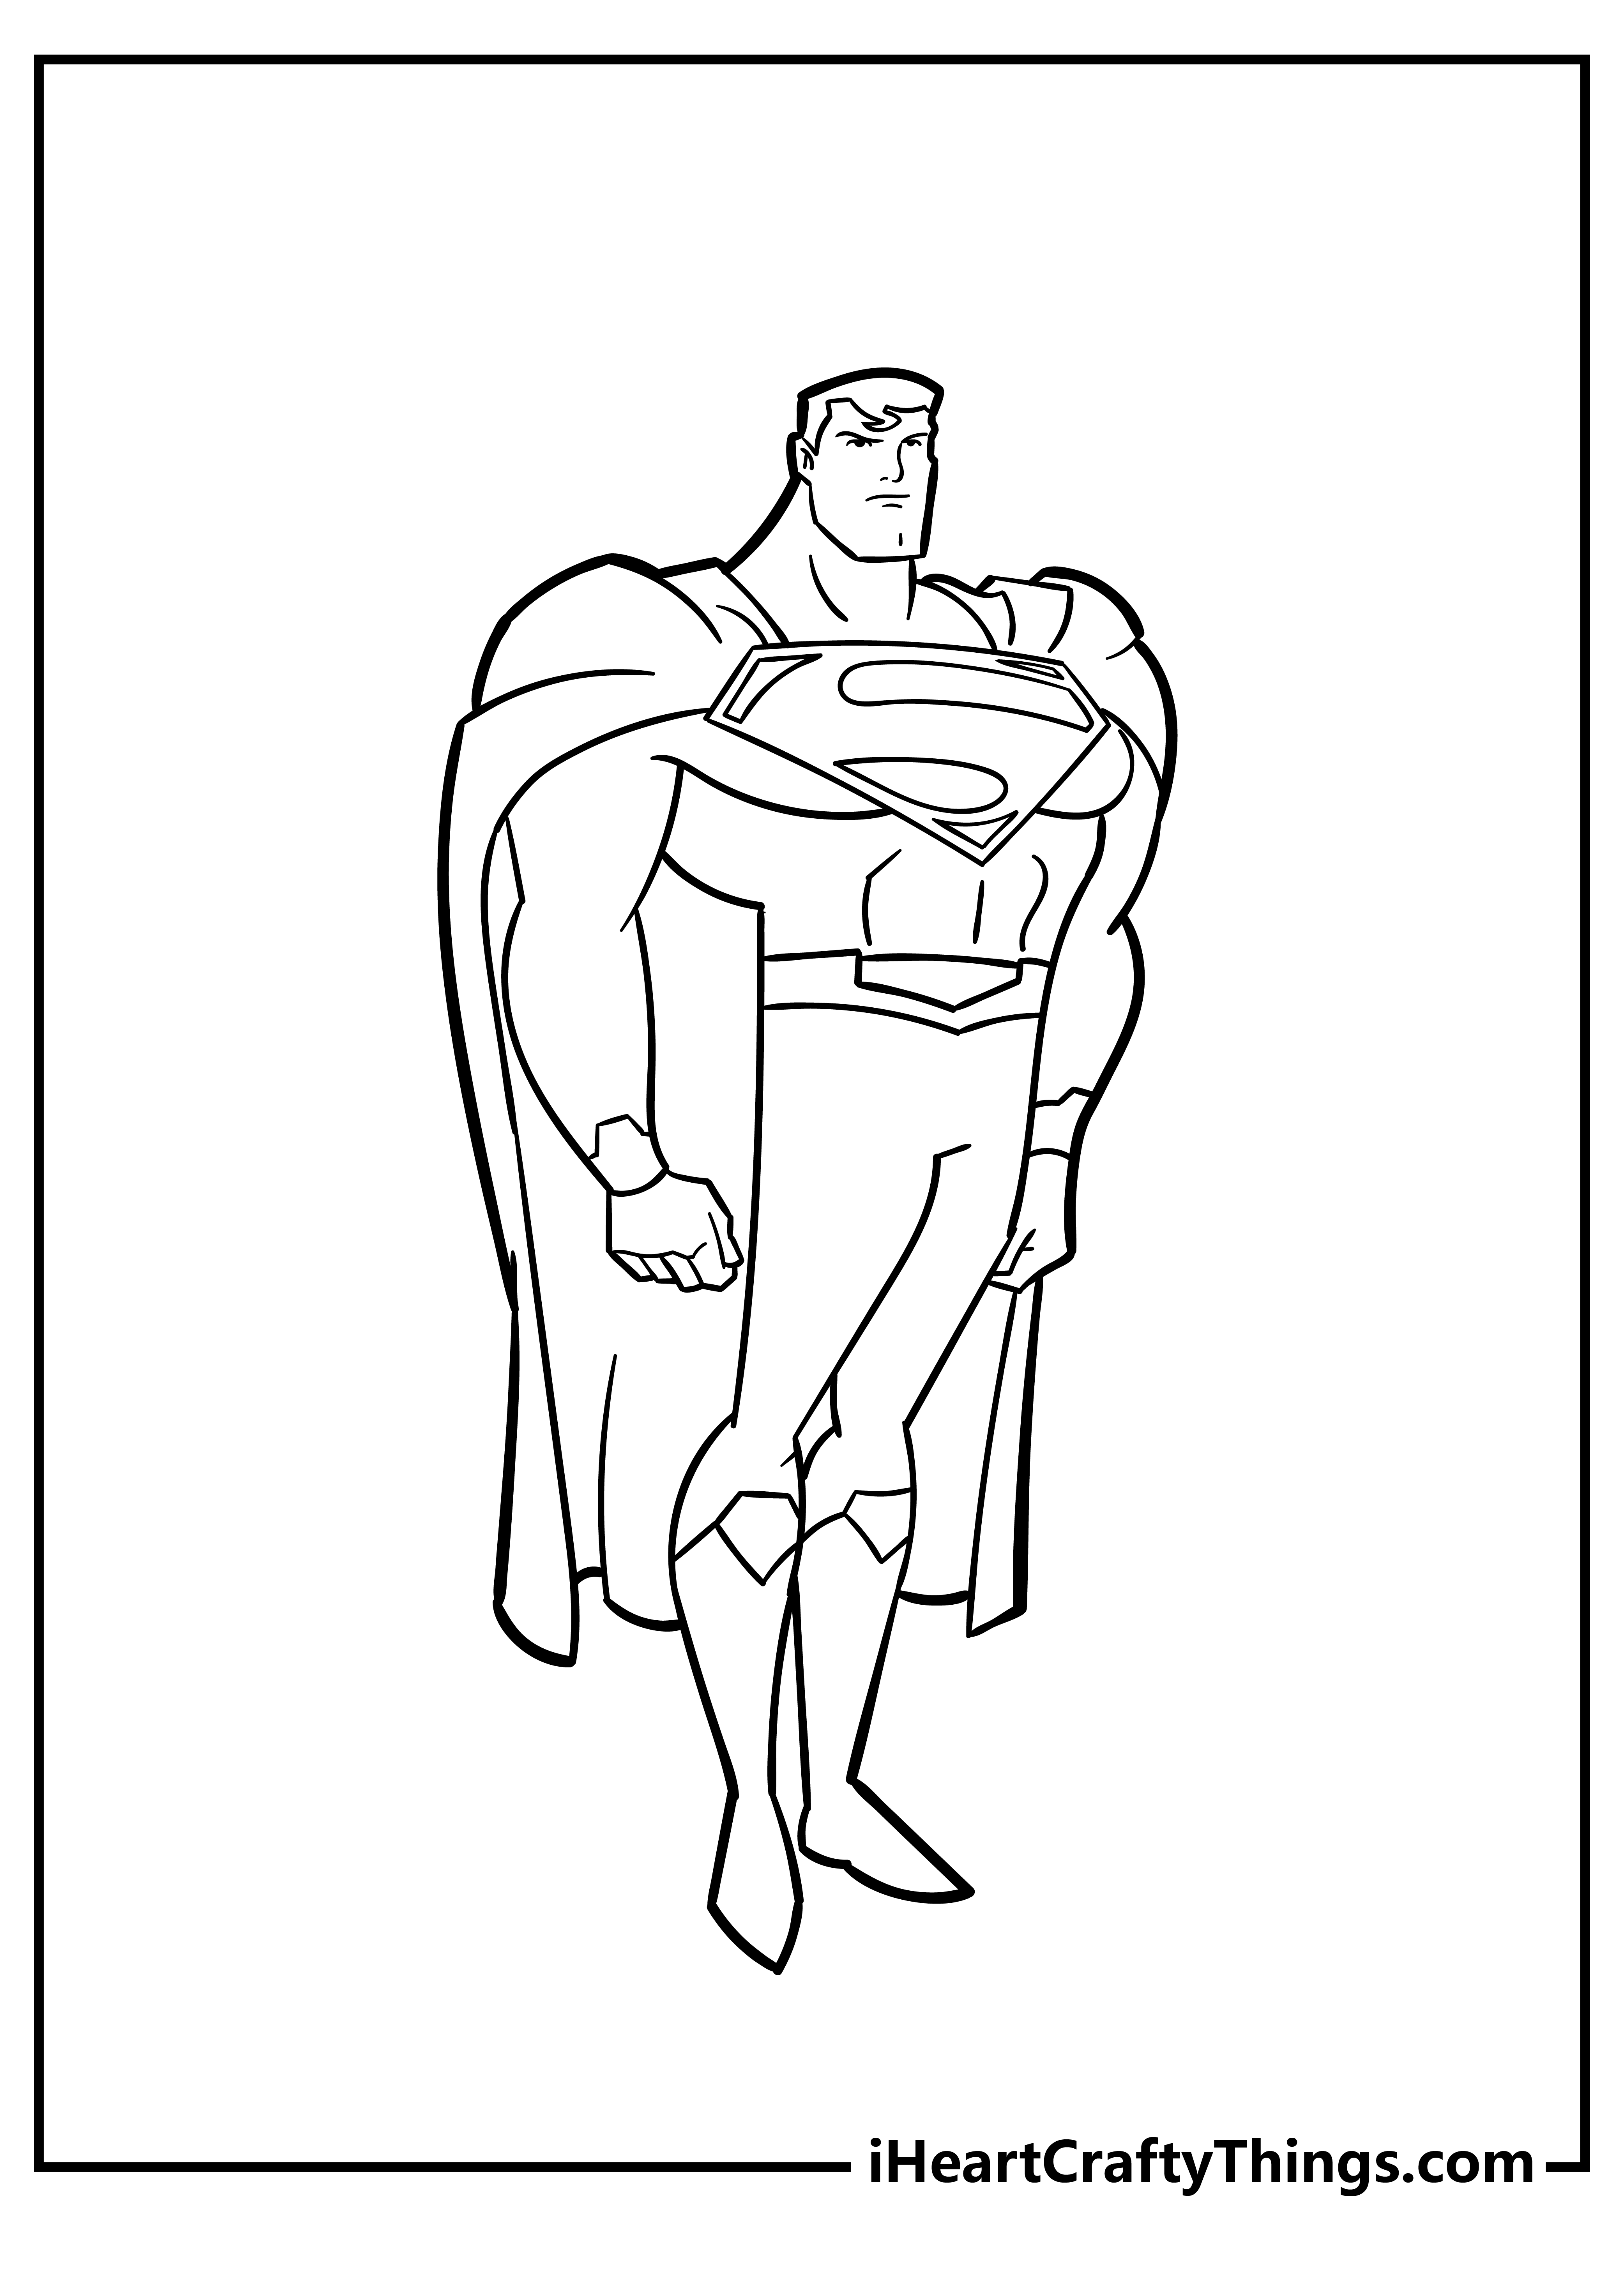 Justice League Coloring Pages Best Coloring Pages For Kids   gn ...